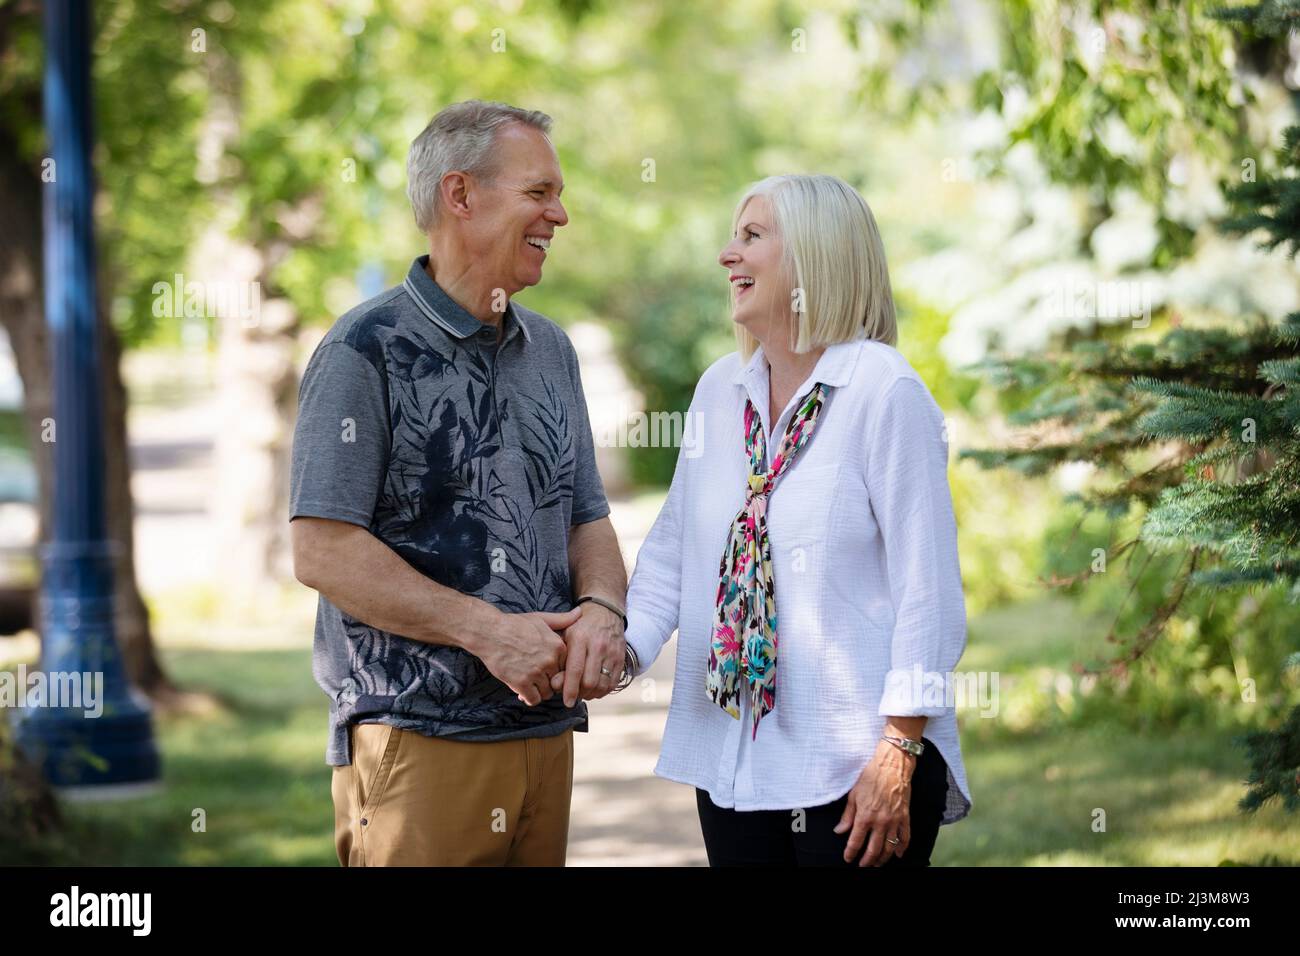 Mature couple holding hands and sharing a moment together in laughter while walking outdoors on a park trail; Edmonton, Alberta, Canada Stock Photo